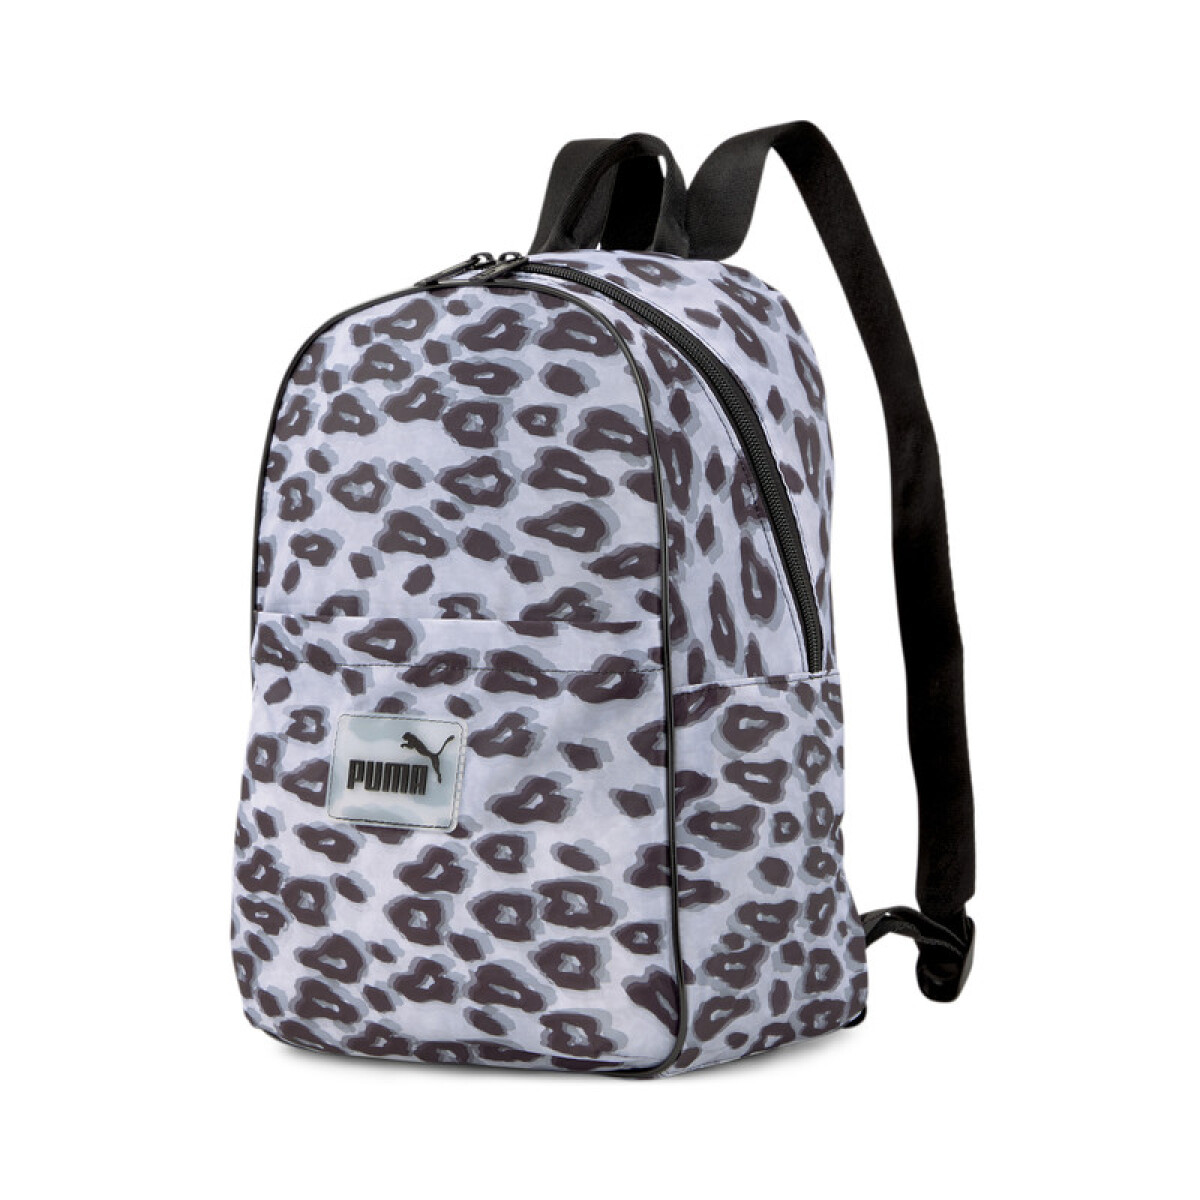 Core Pop Backpack 07792502 - Negro Gráfico 